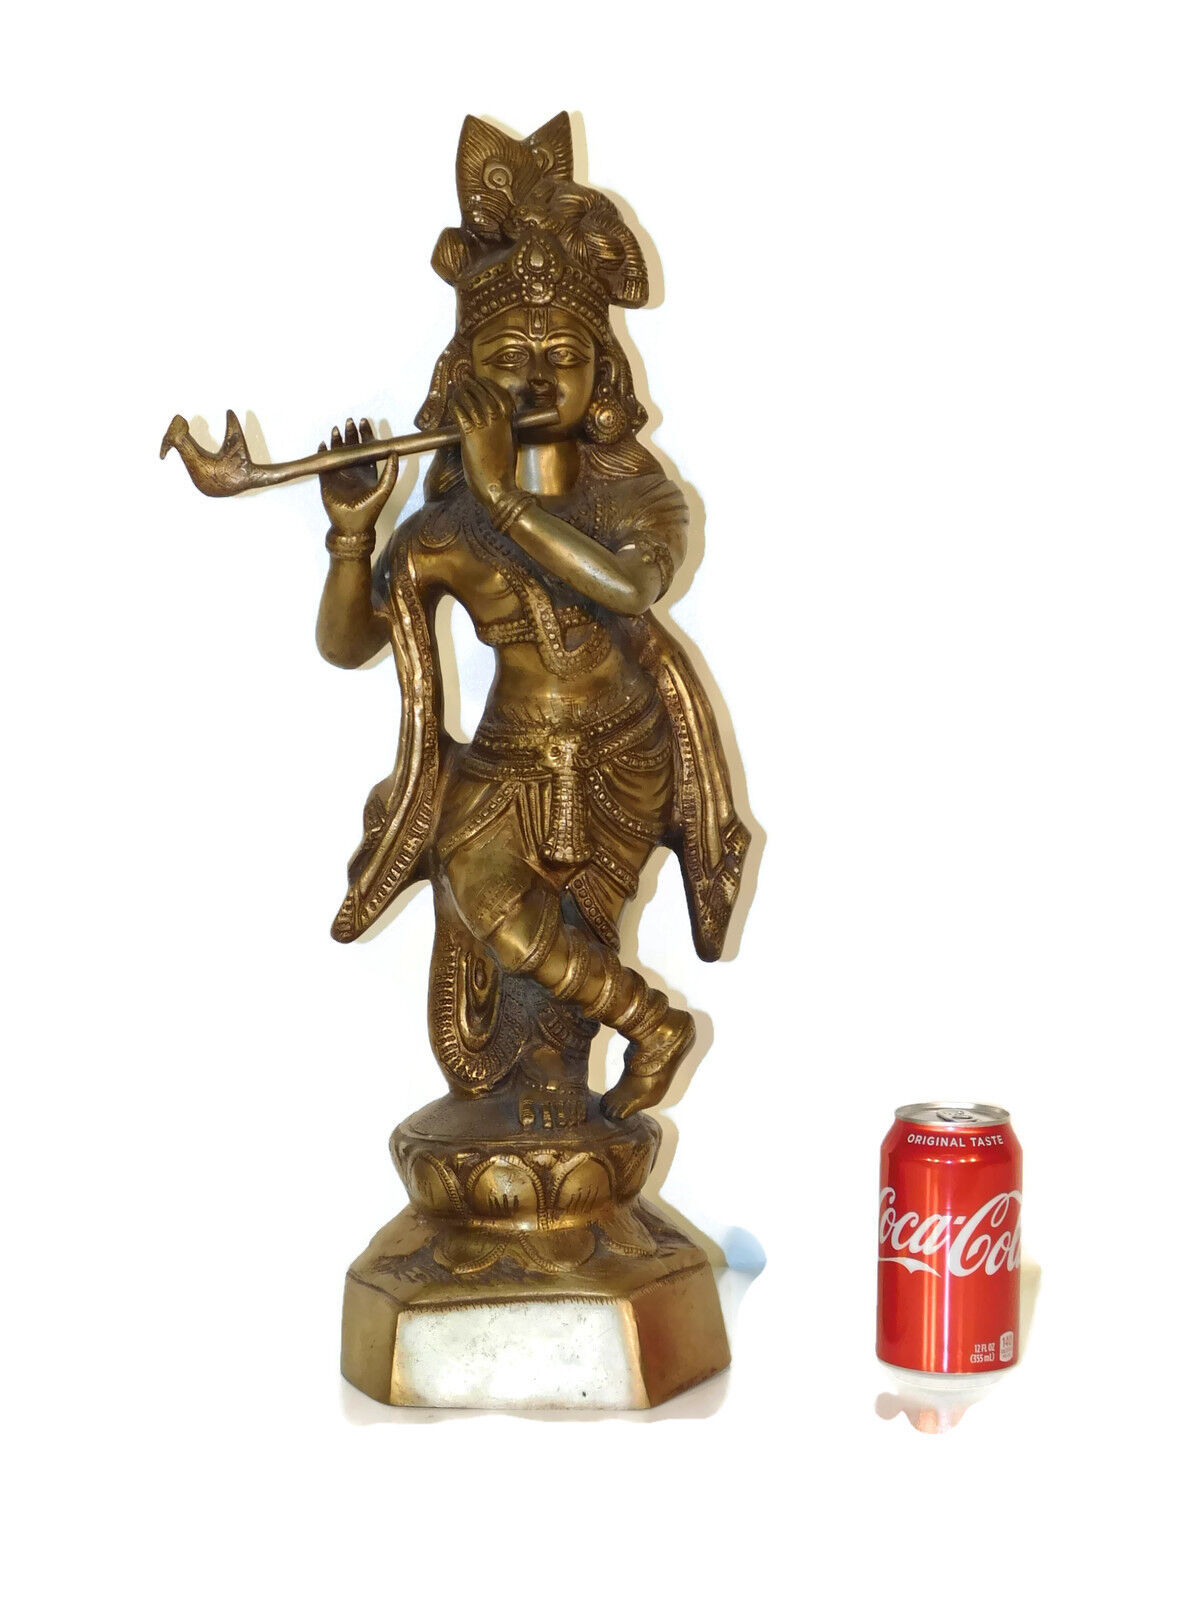 MASSIVE Vintage Solid Brass or Bronze Standing Flute Playing Shiva Statue 